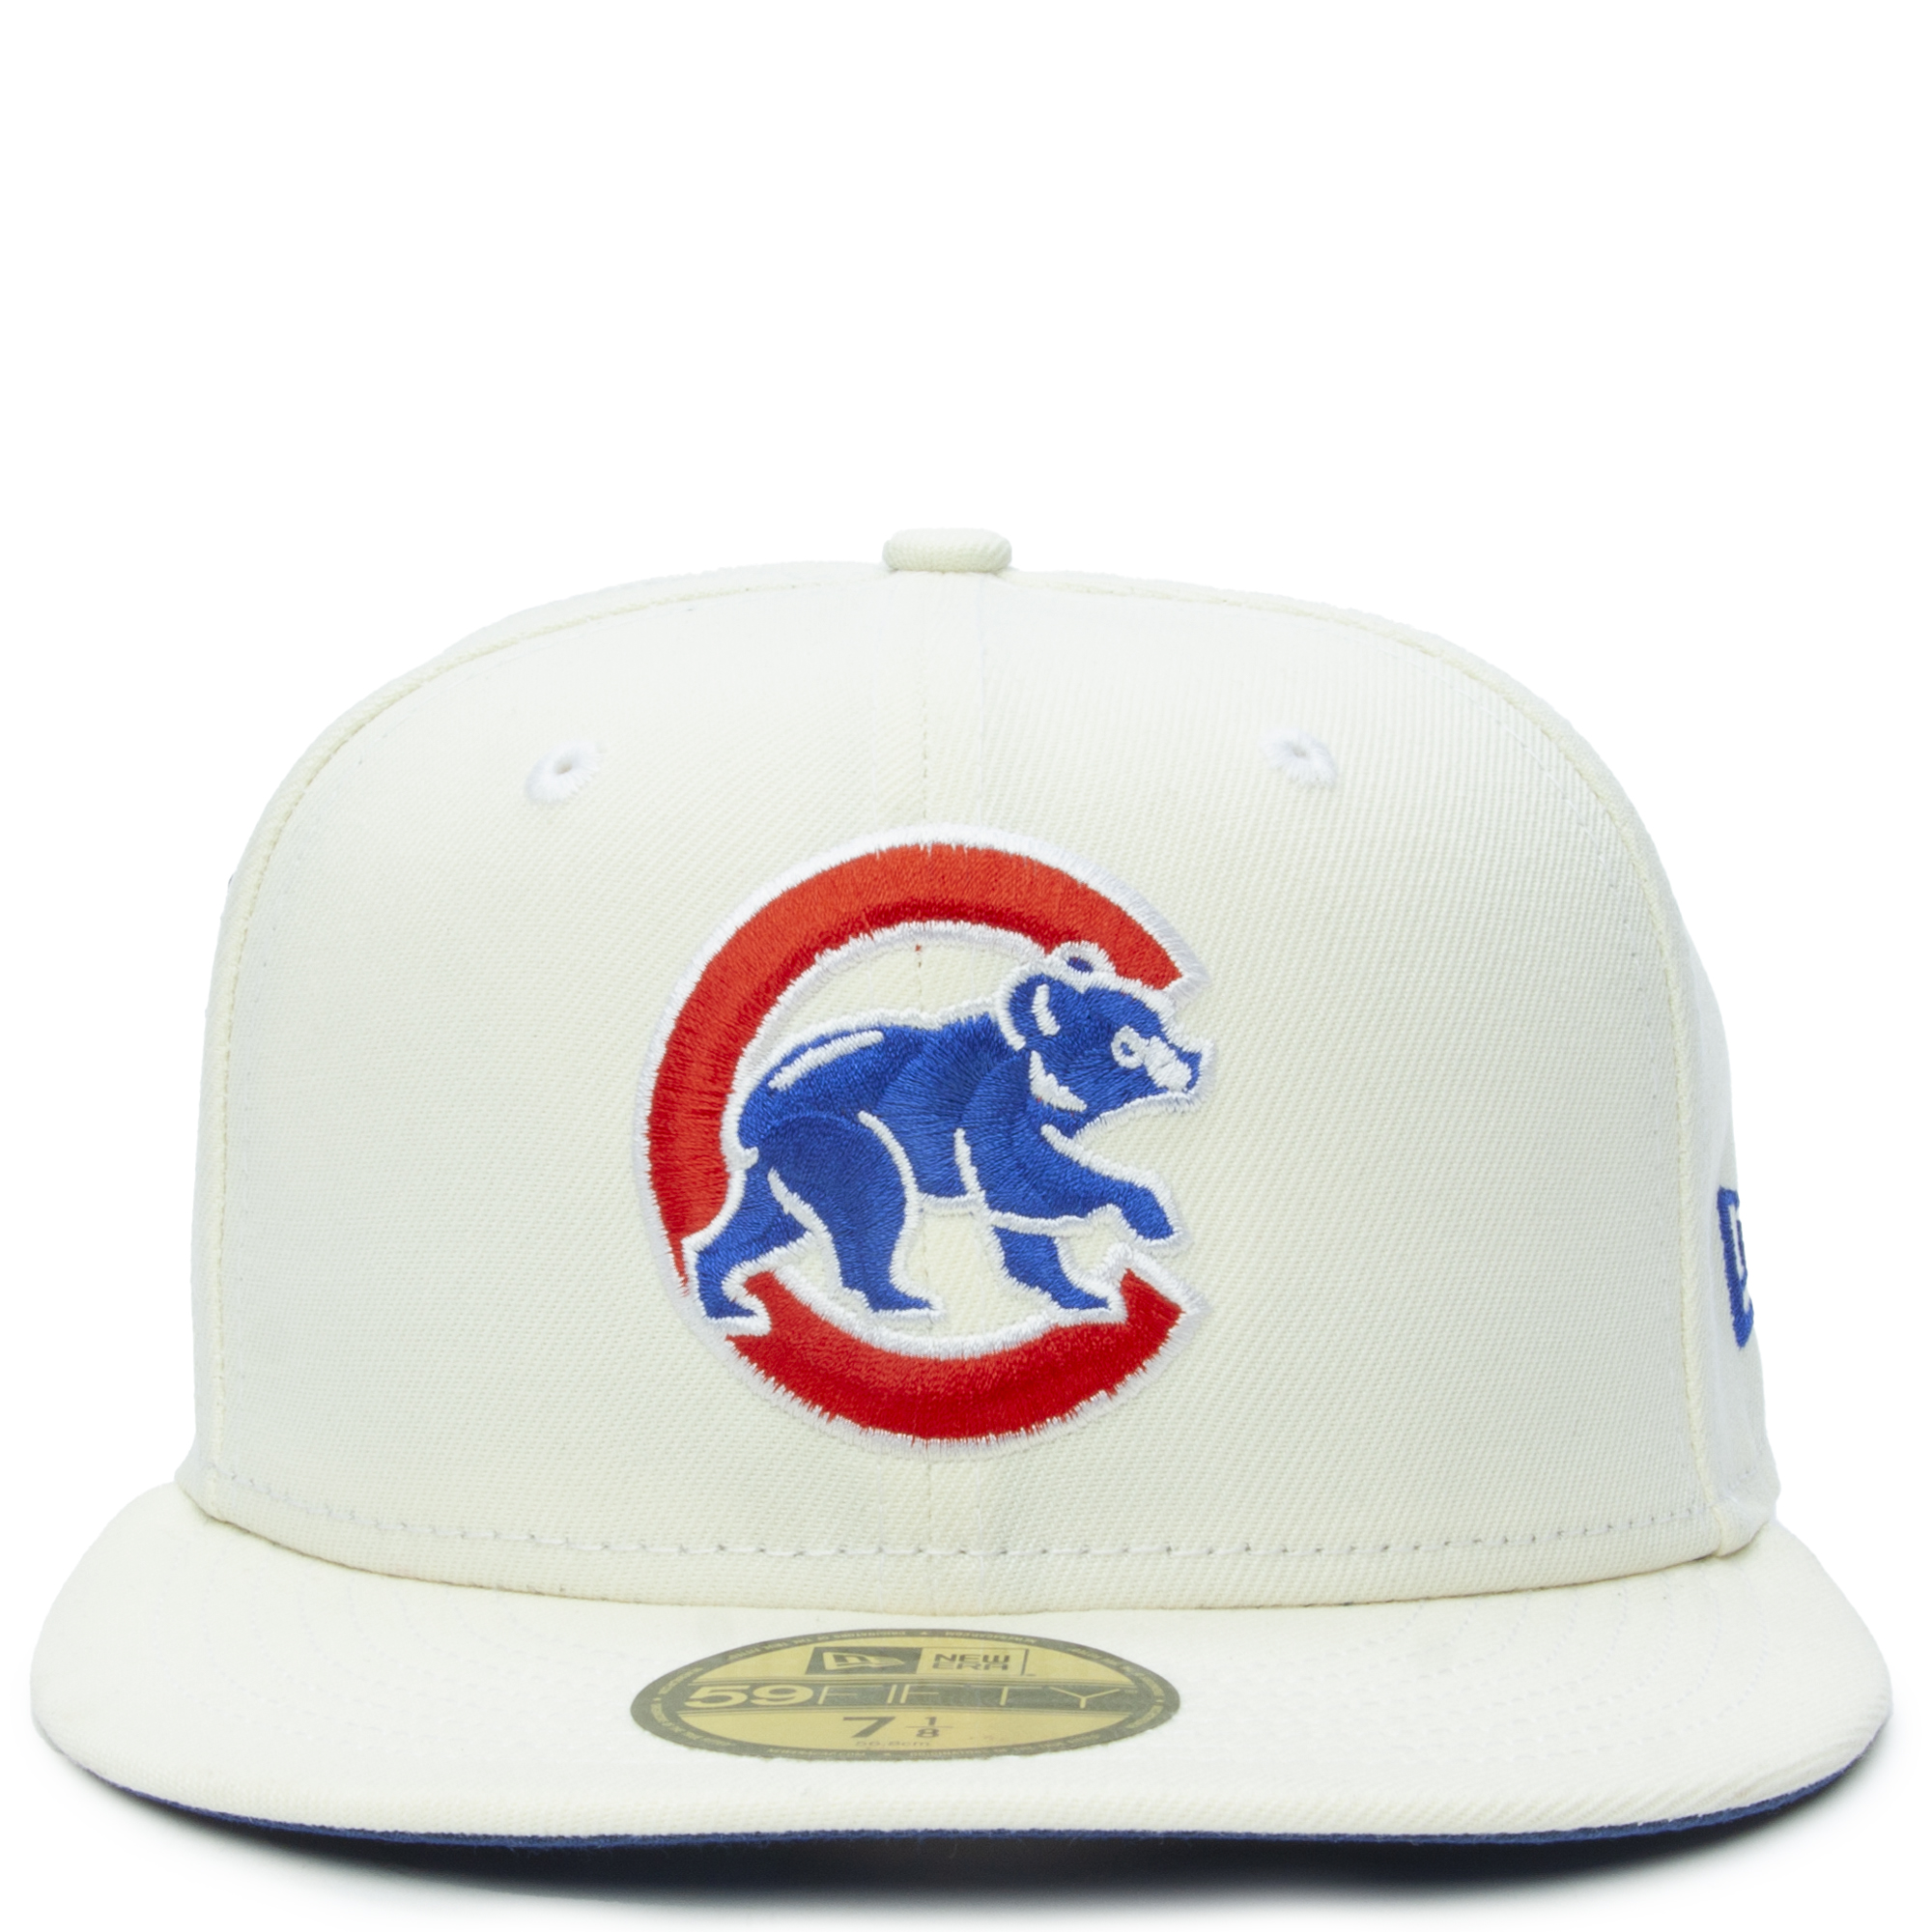 New Era 59Fifty Chicago Cubs Purple Fitted Hat – 402Fitted